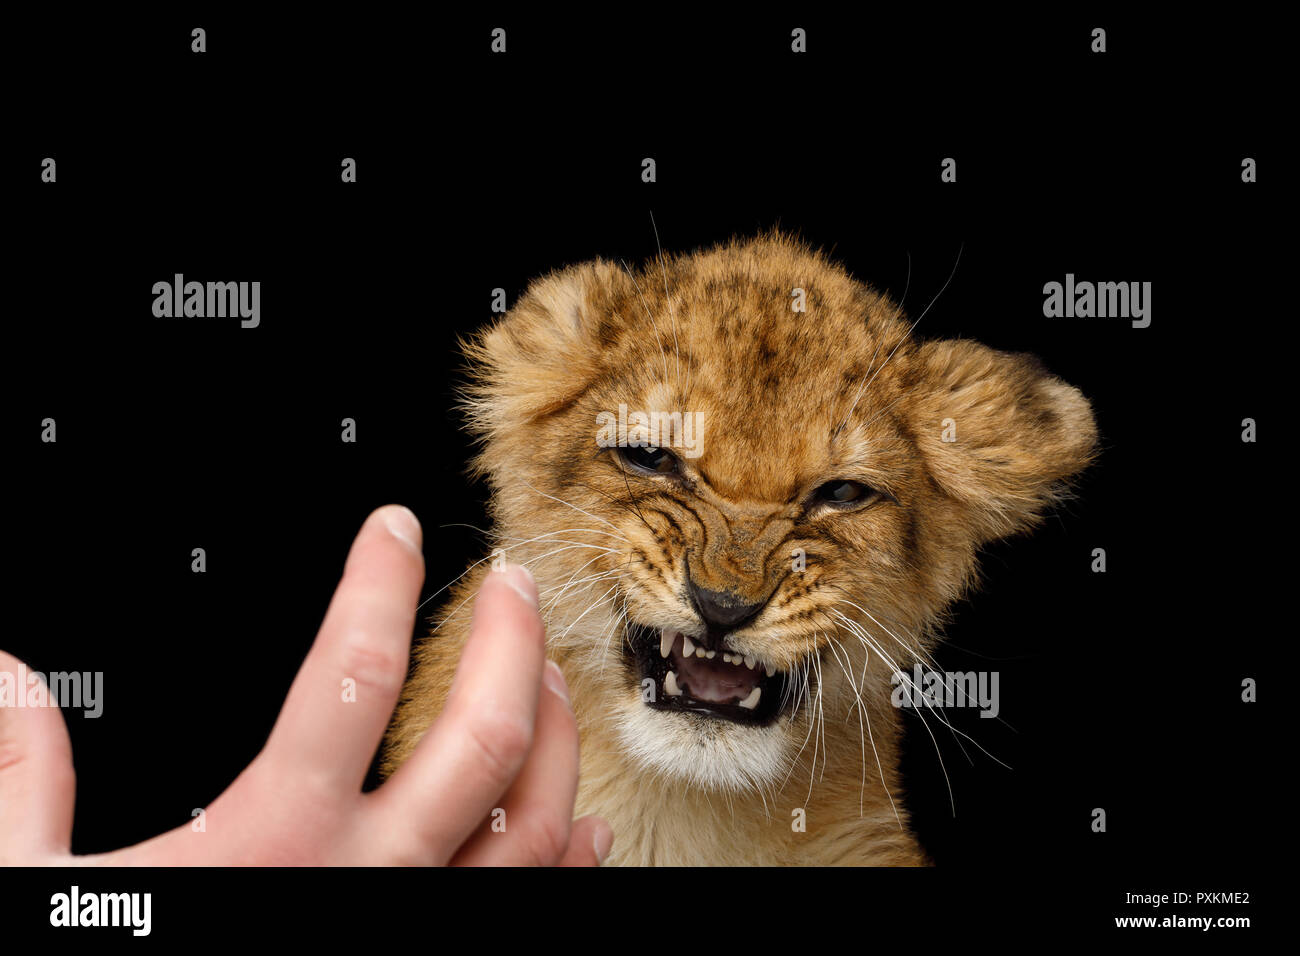 Portrait of Frightened Lion Cub With grin face hissing at human hand Isolated on Black Background Stock Photo